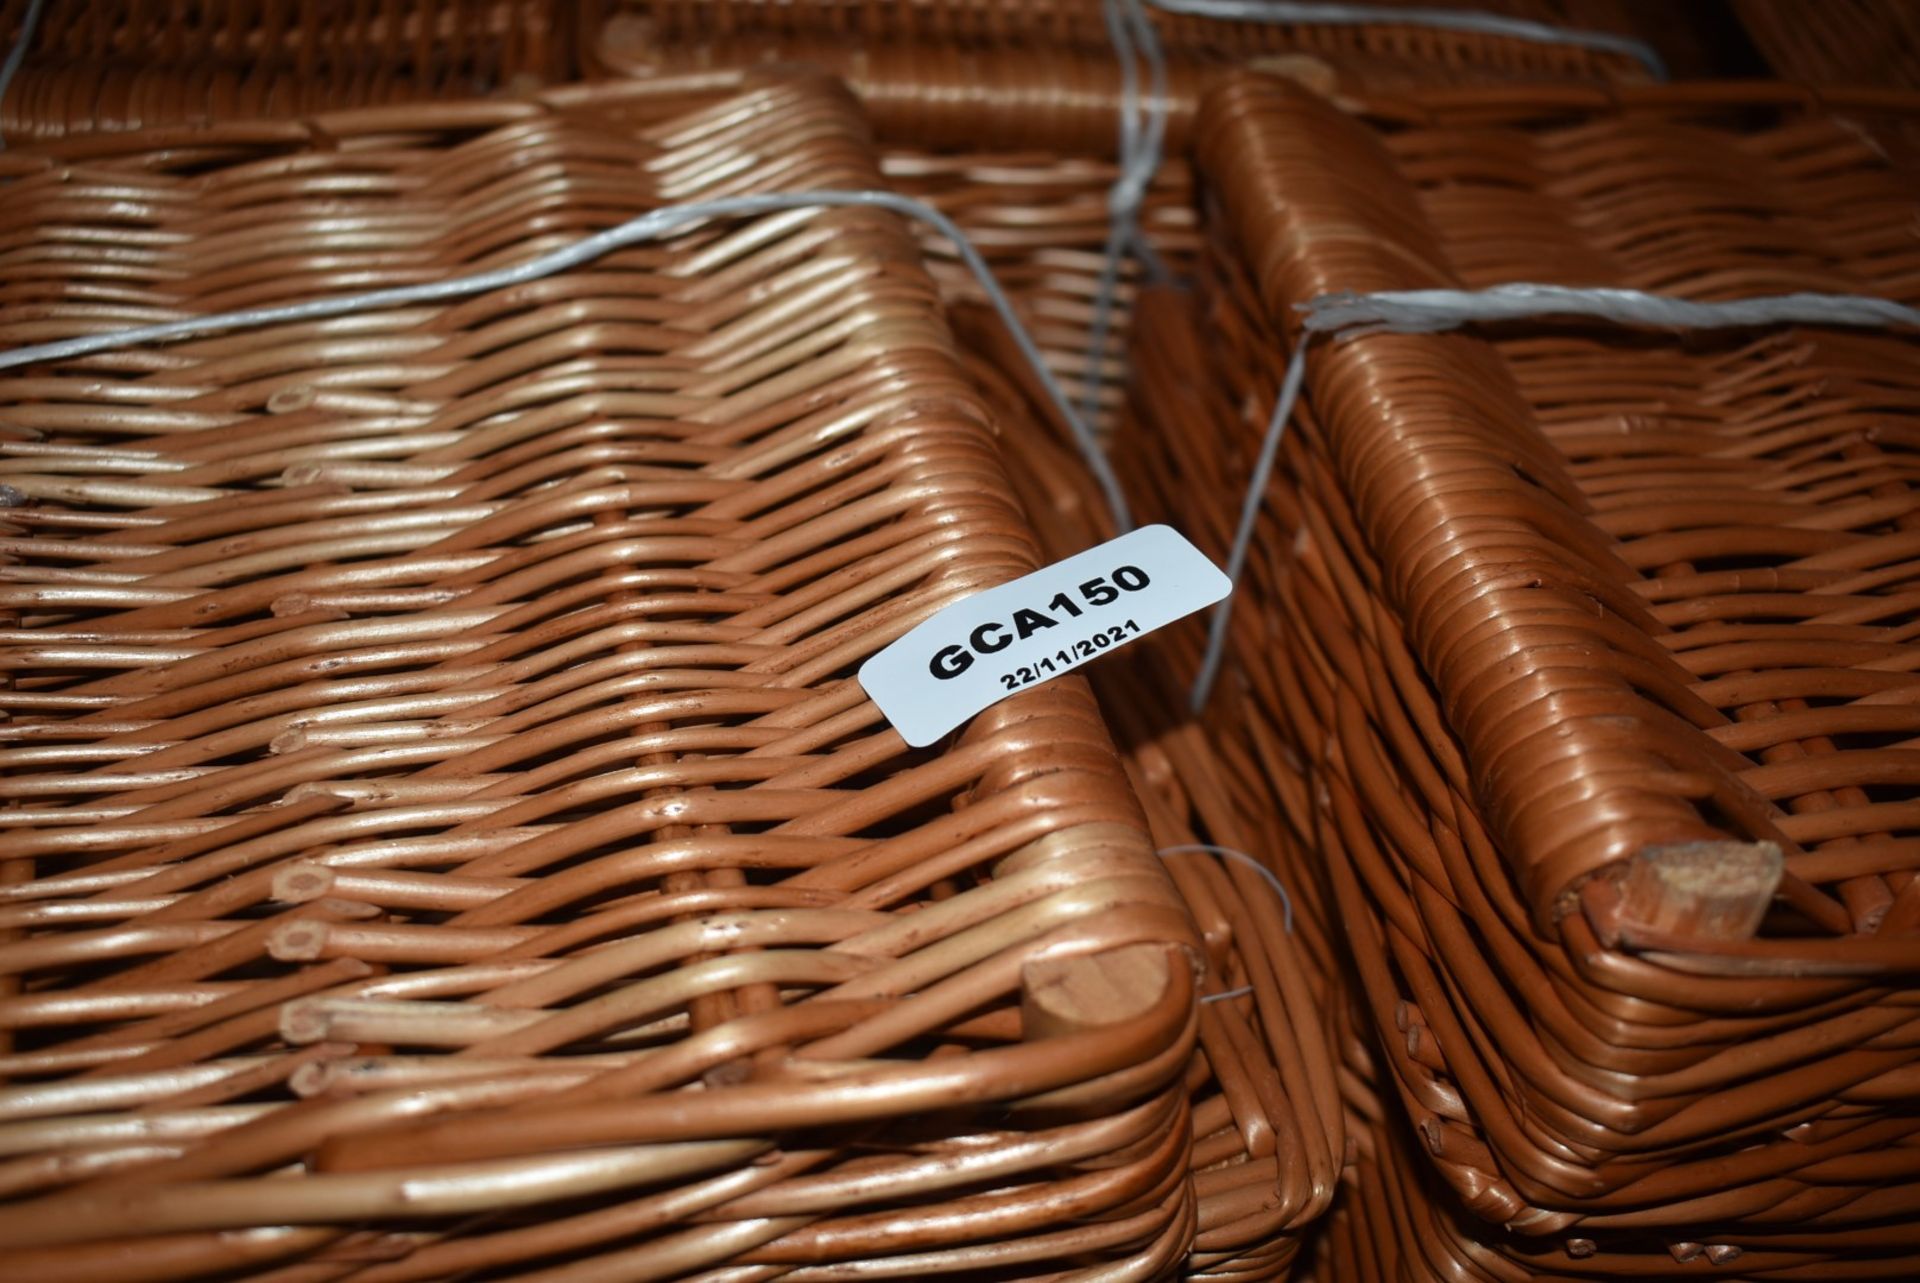 8 x Hand Woven Retail Display Sloping Wicker Baskets - Ideal For Presentation in Wide Range of - Image 10 of 10